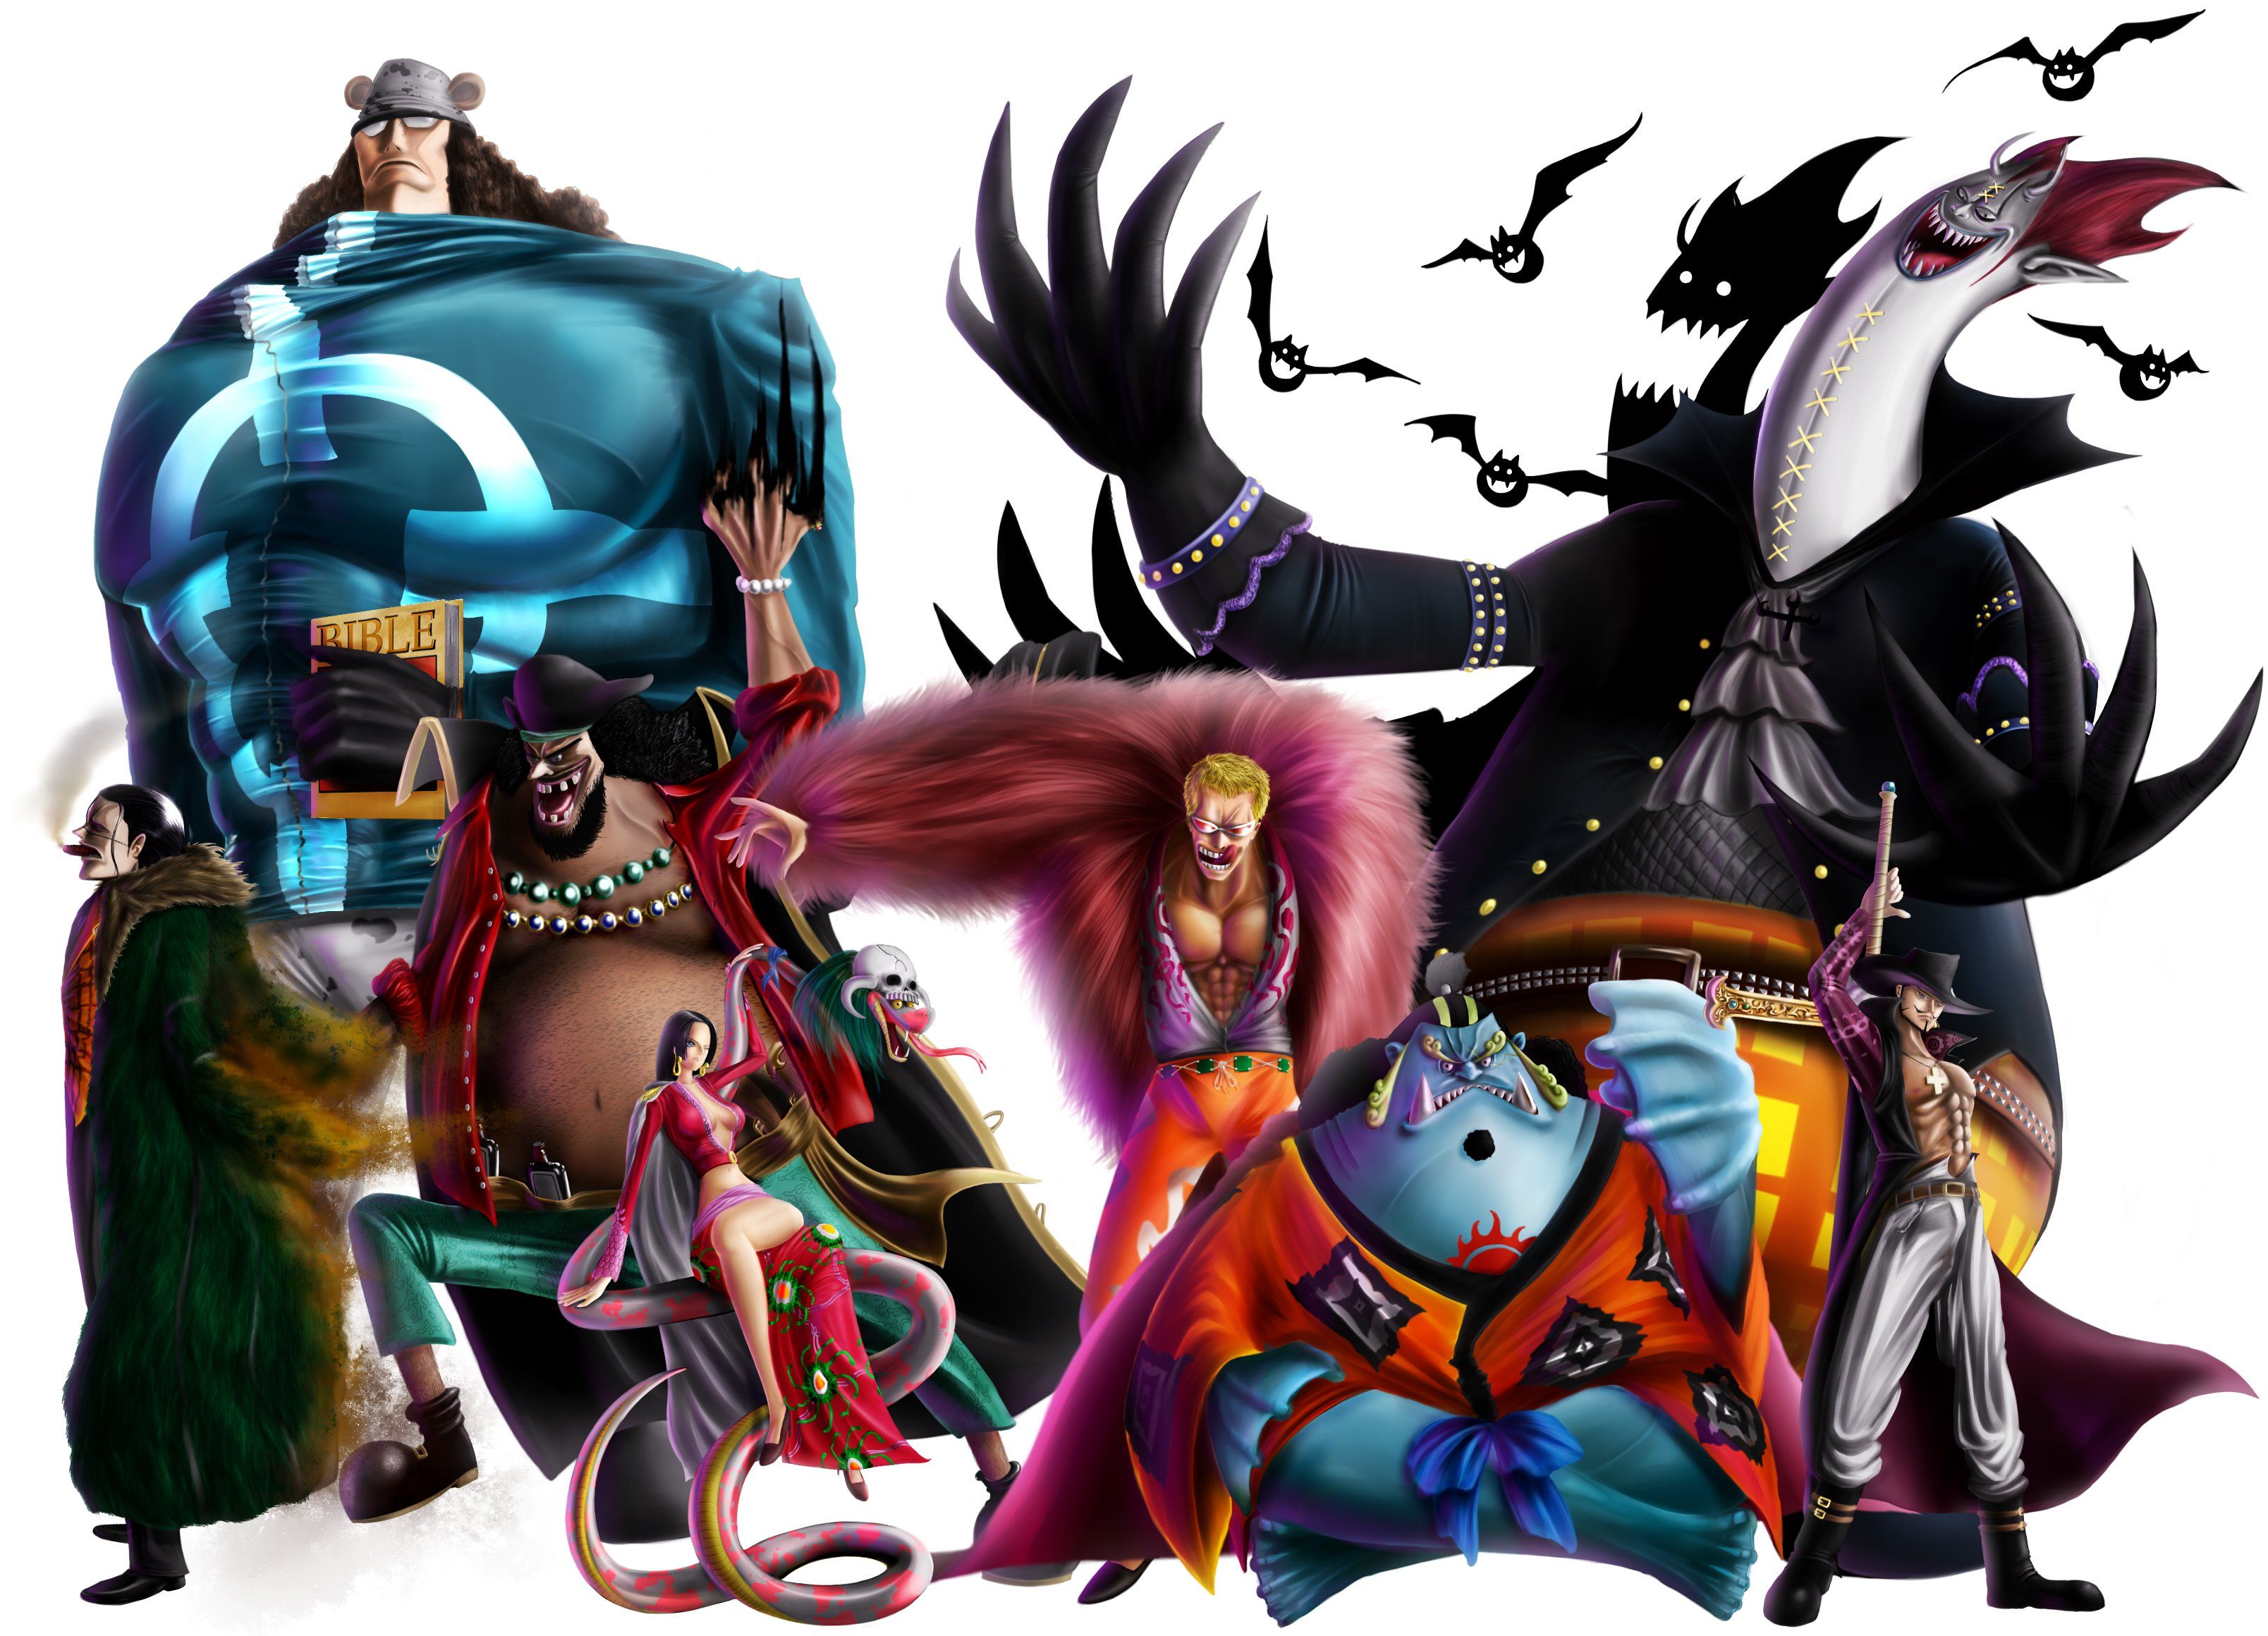 The seven warlords of the sea HD Wallpaper